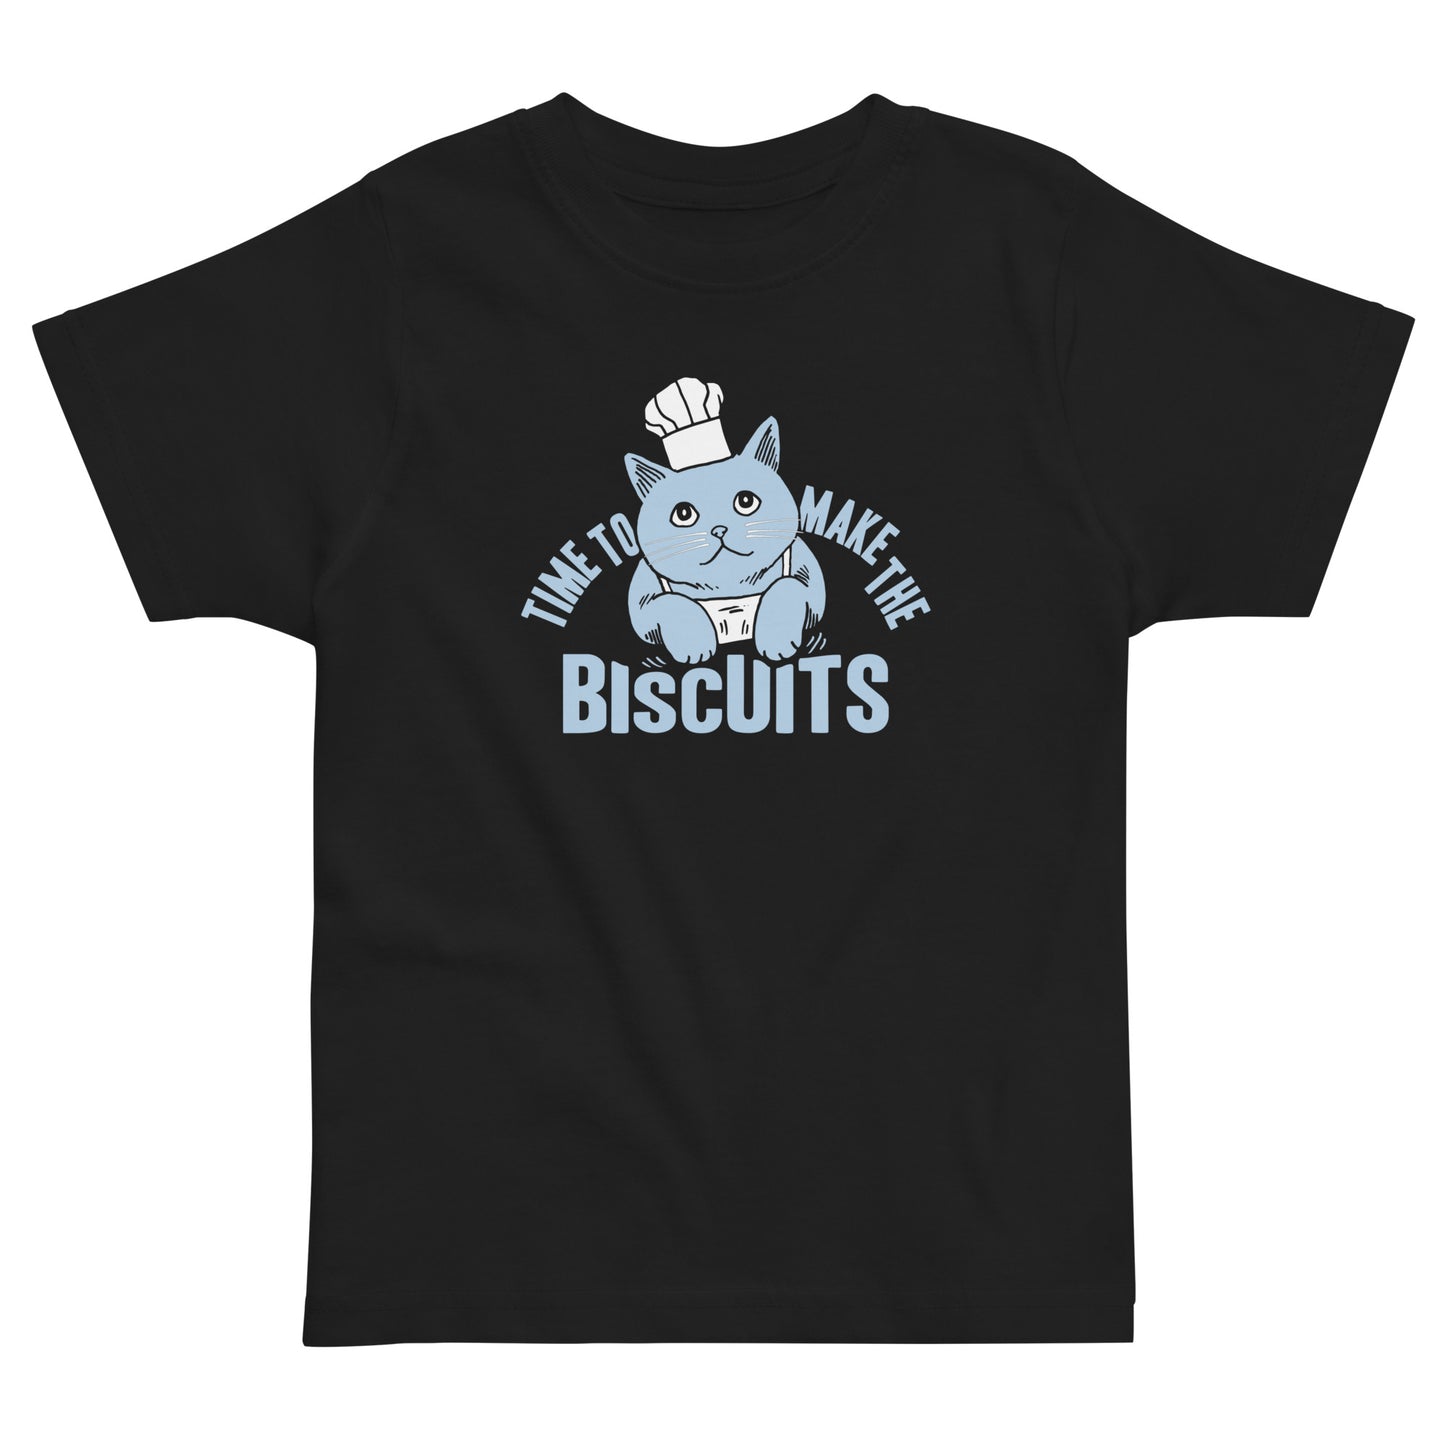 Time To Make The Biscuits Kid's Toddler Tee